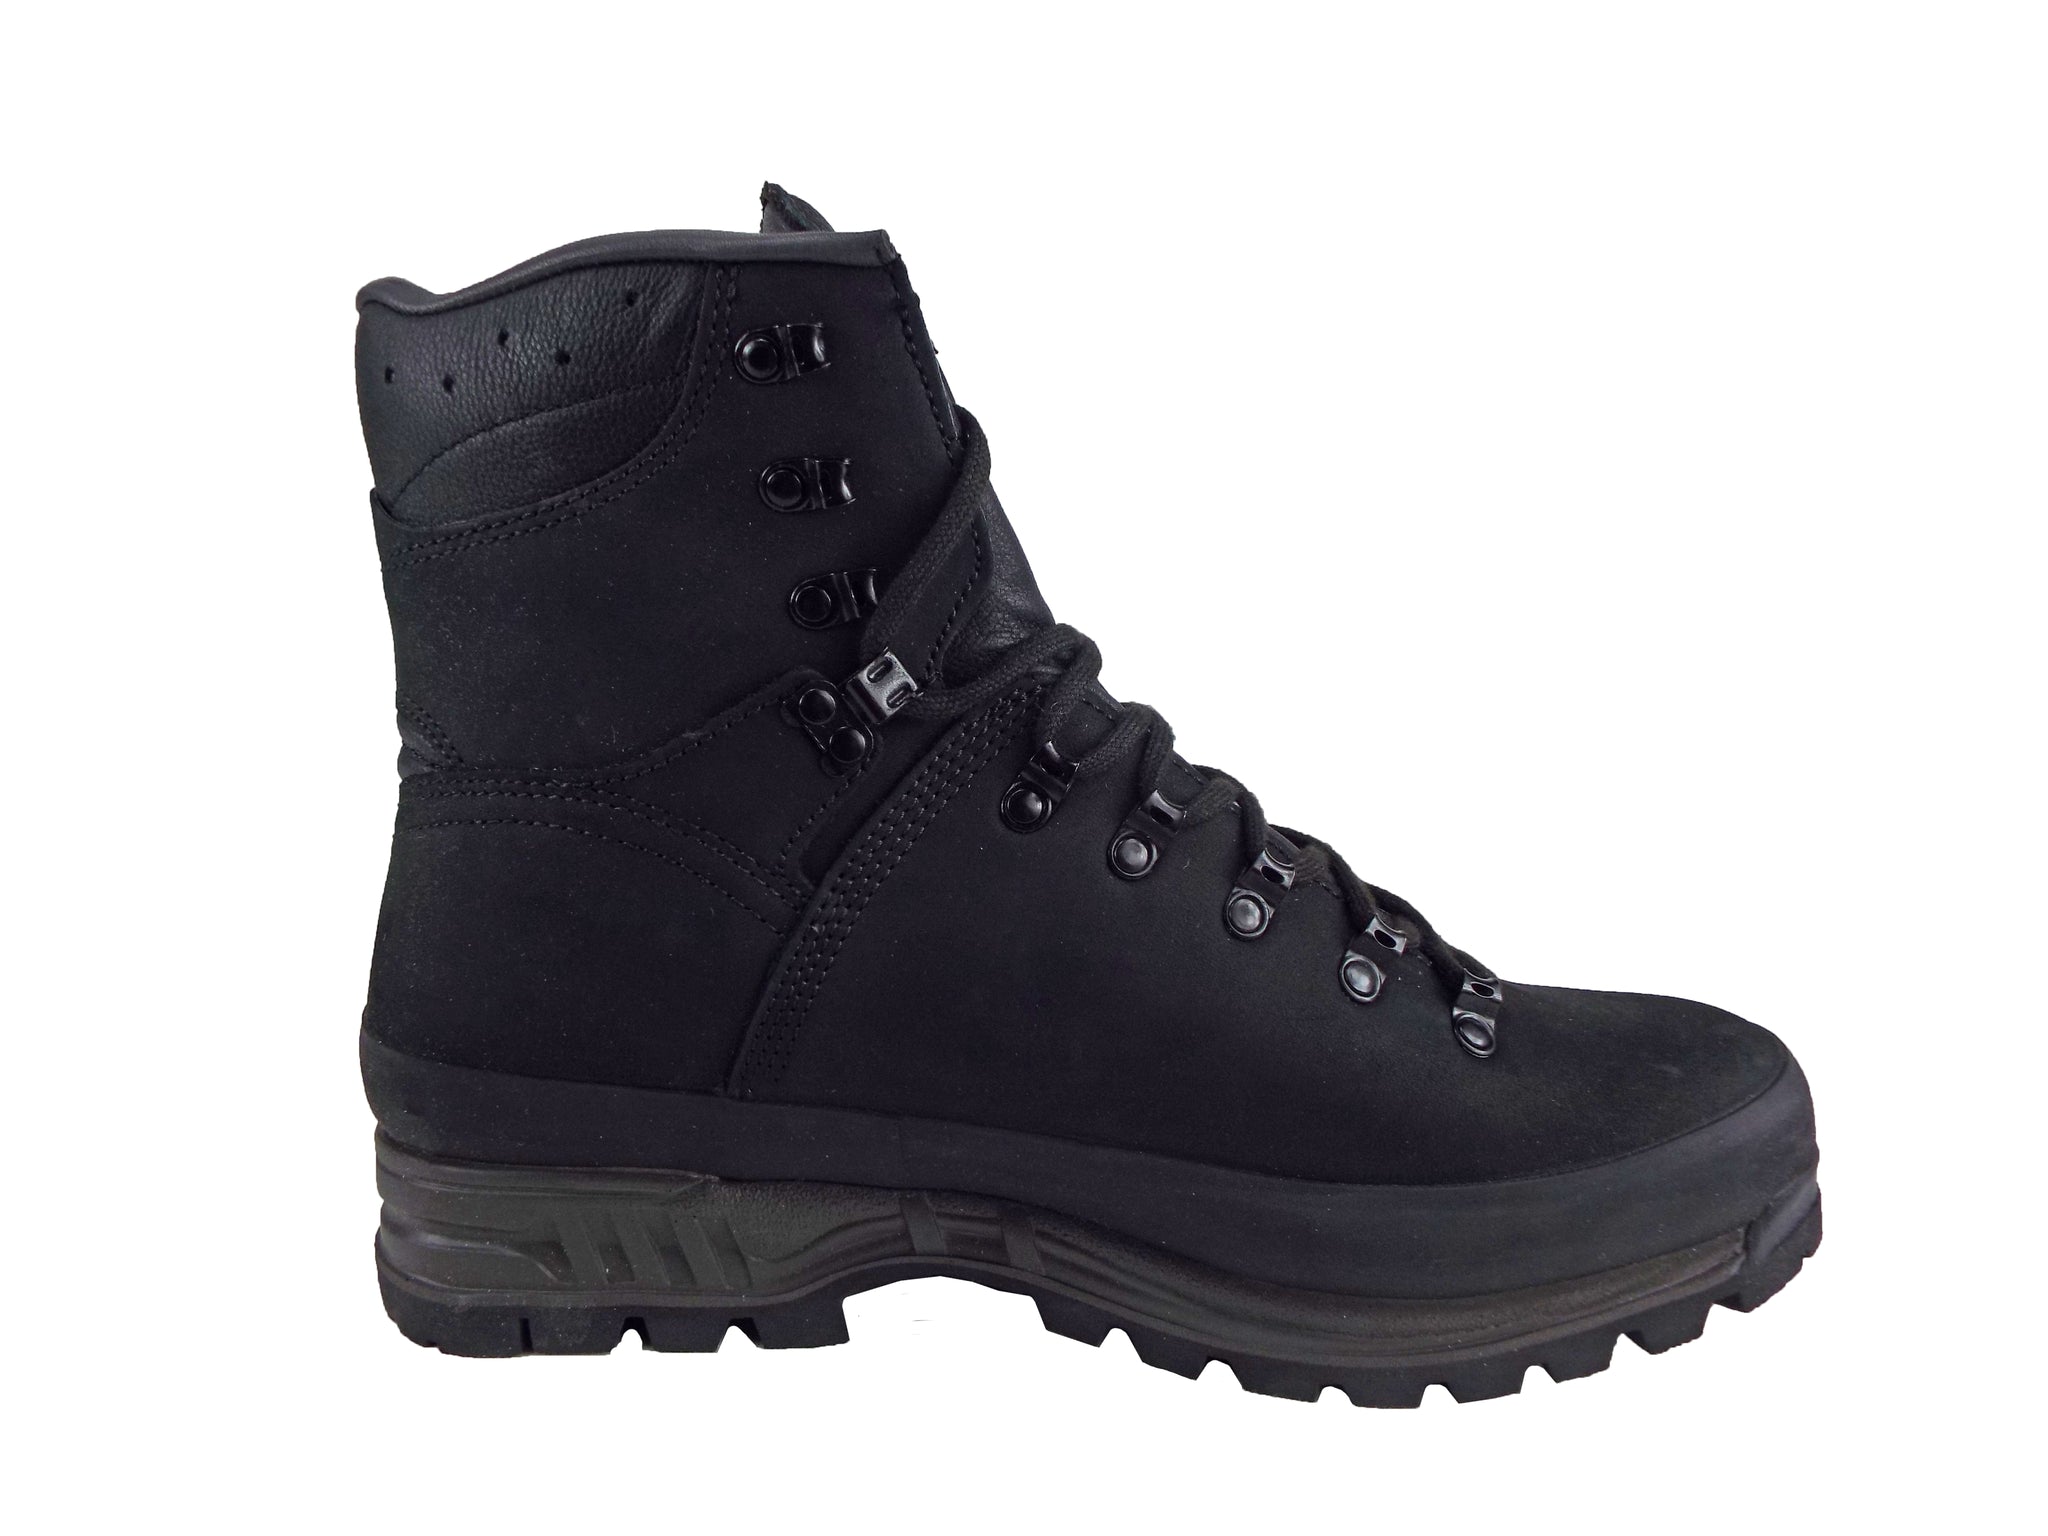 Dutch Army Mountain Hiking Boots - Meindl brand - Gore-Tex Lined ...